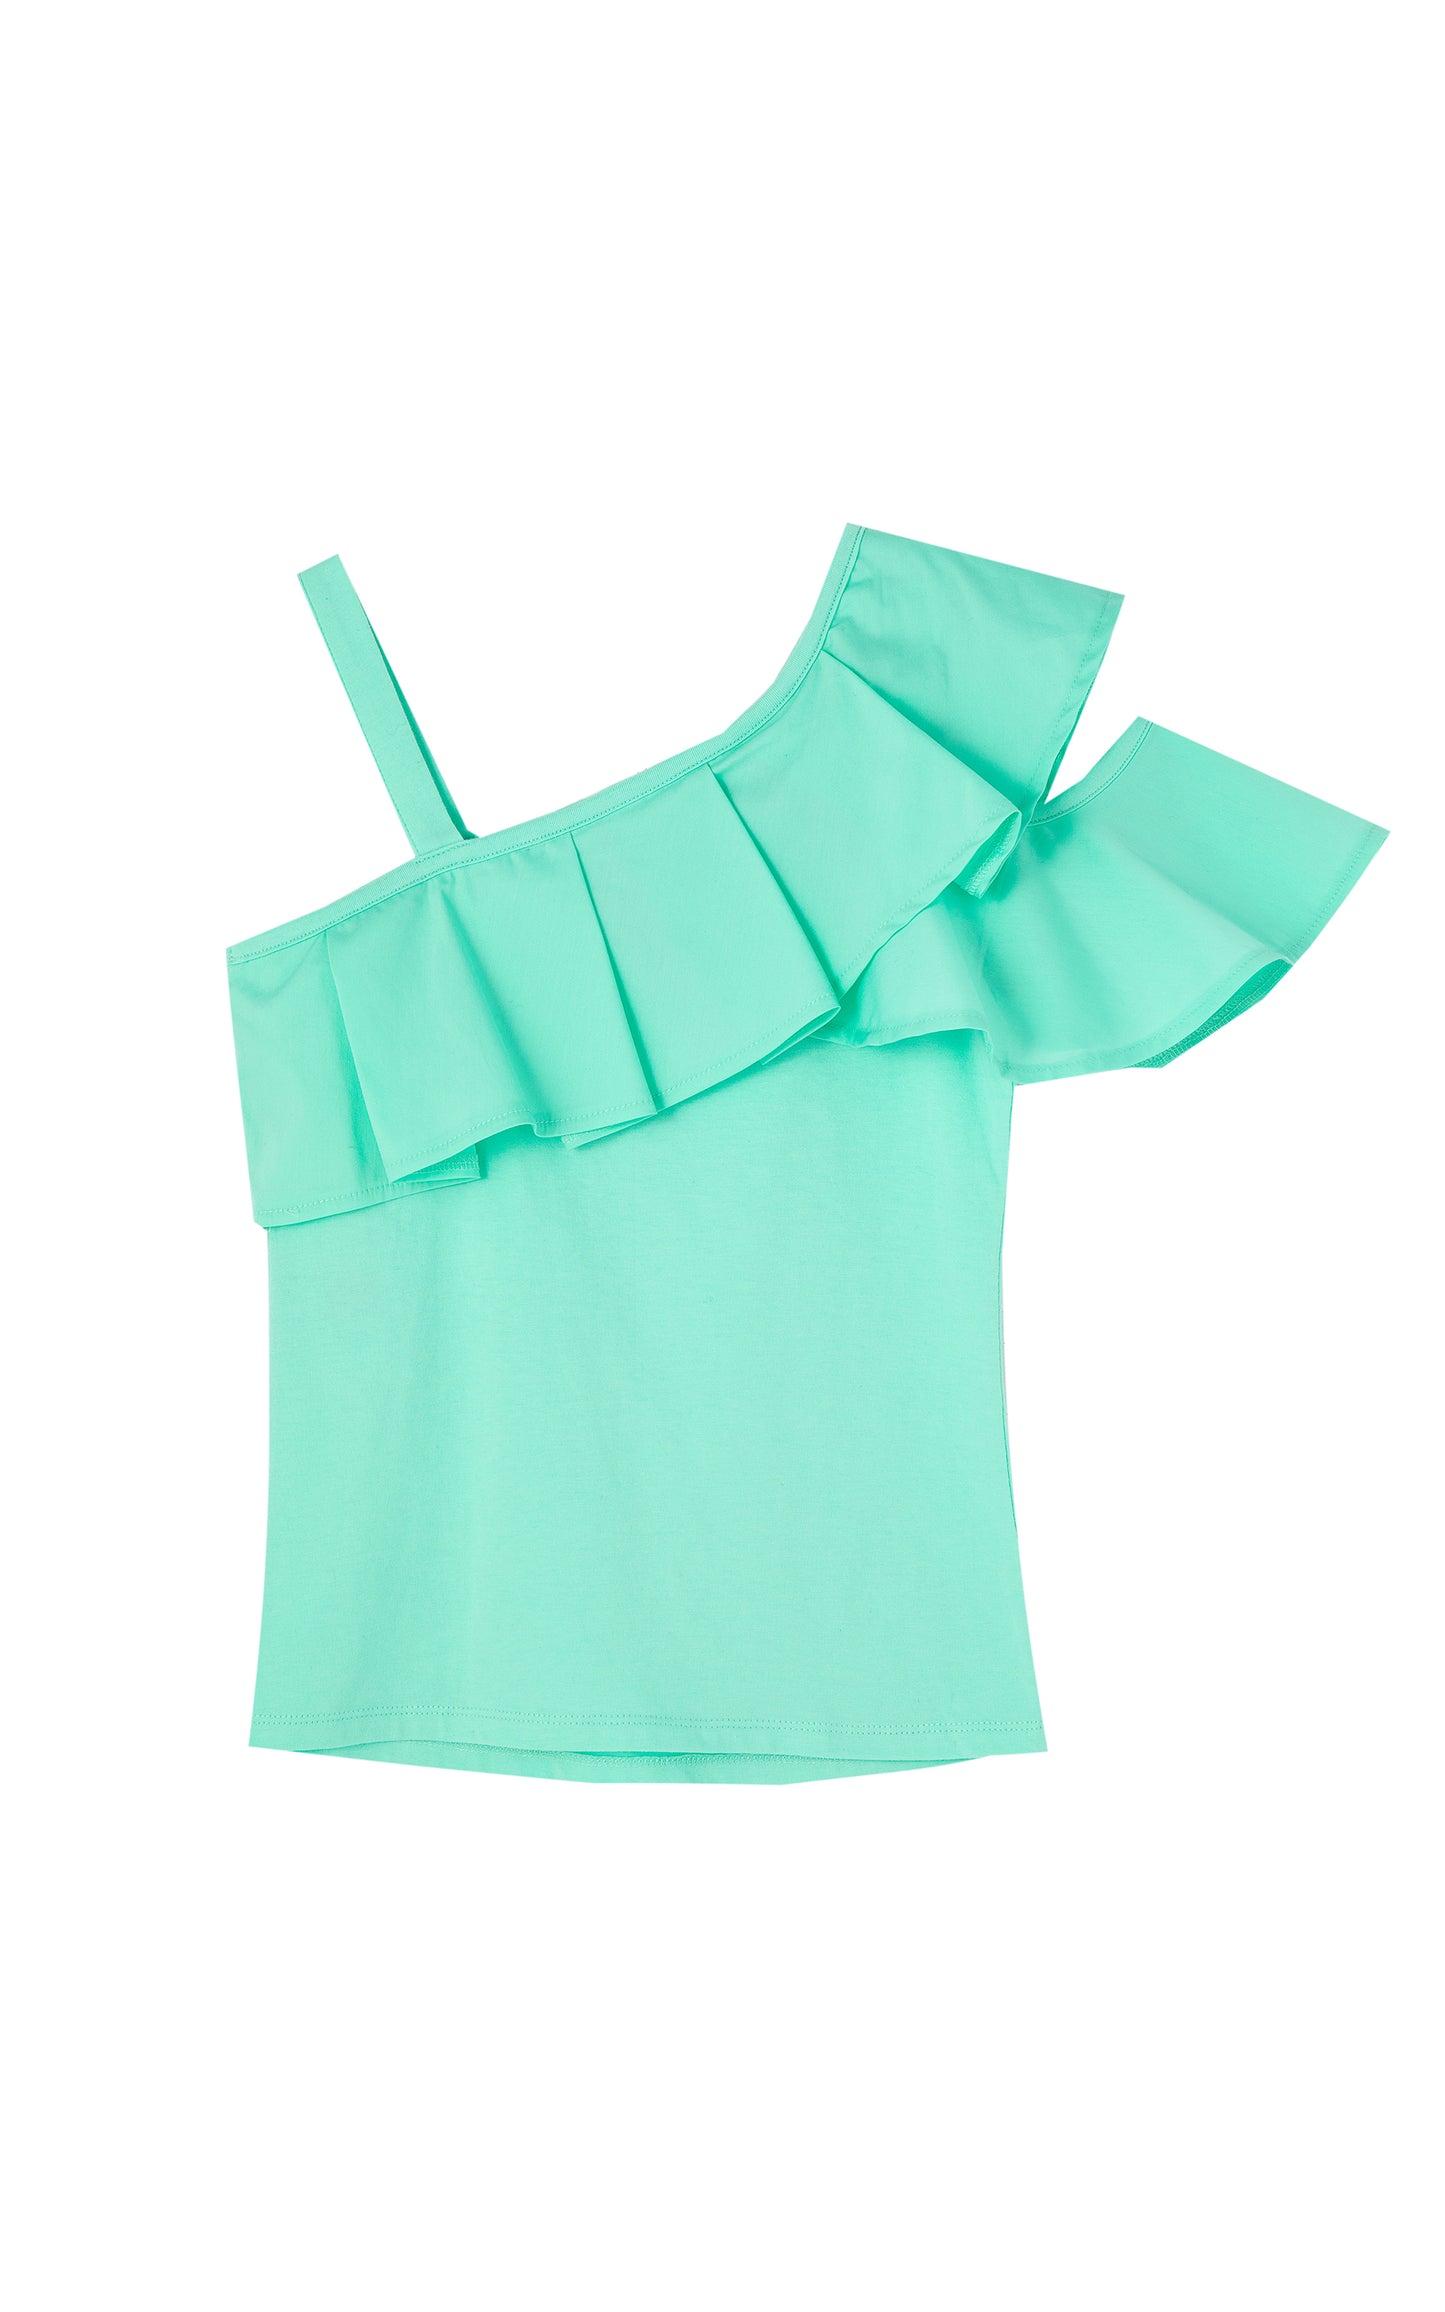 BACK OF PALE GREEN ASYMMETRICAL OFF THE SHOULDER RUFFLE TOP